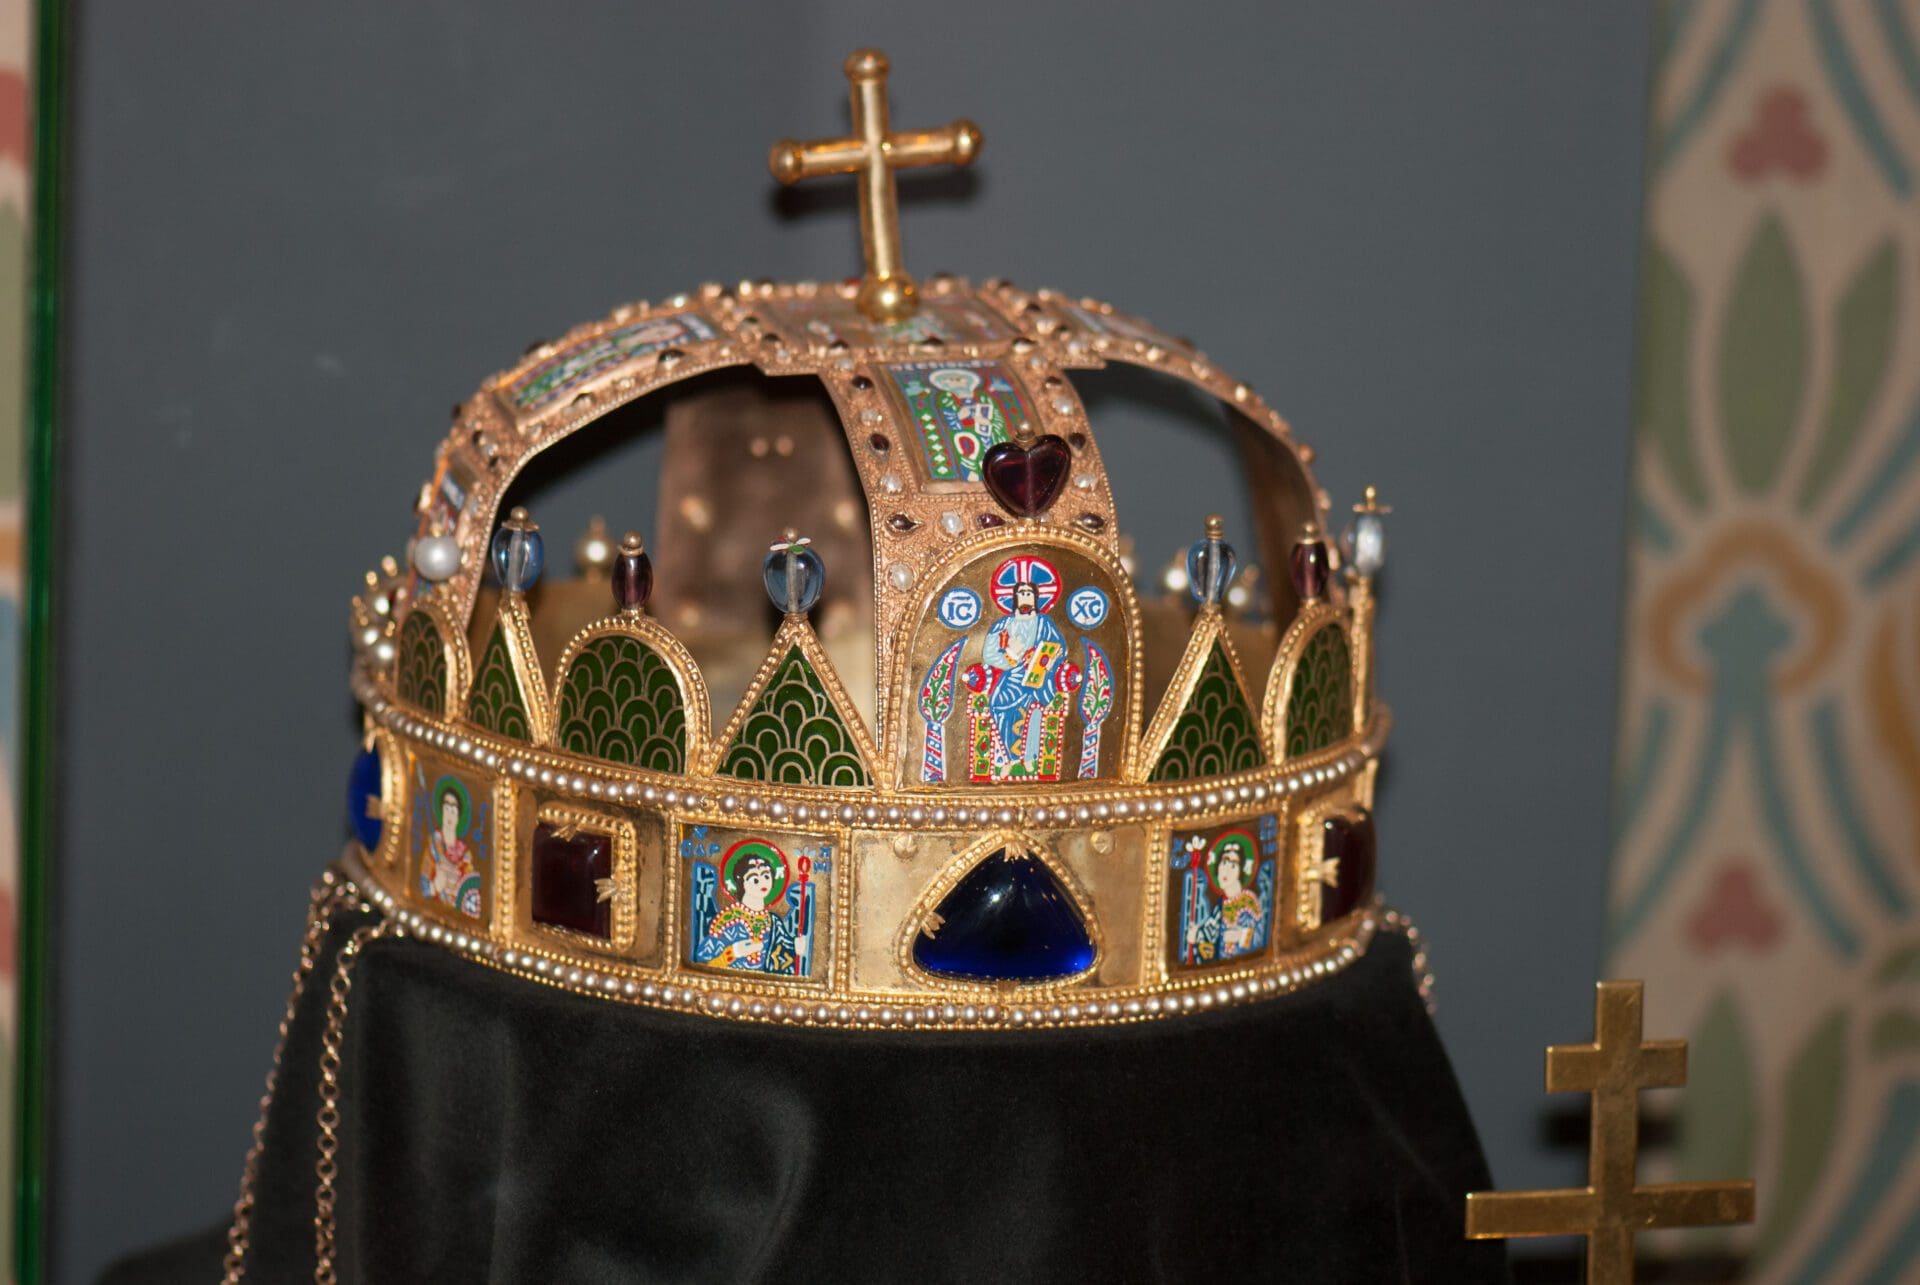 The Holy Crown of Hungary.